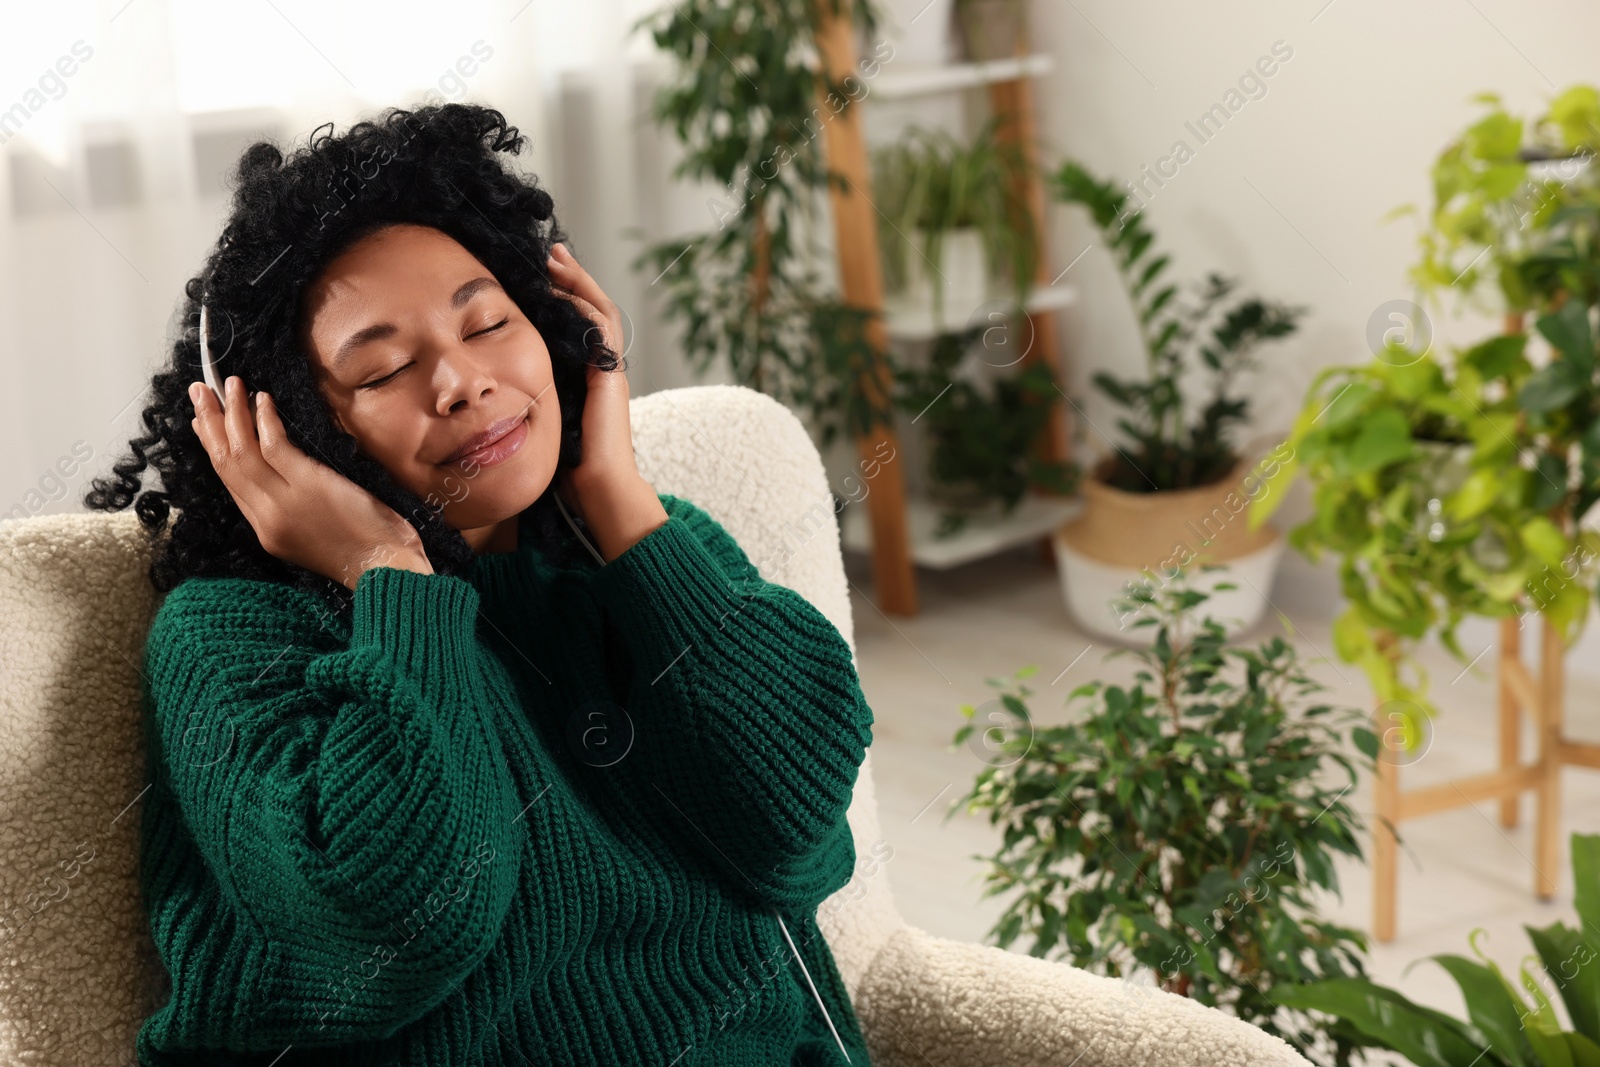 Photo of Relaxing atmosphere. Woman wearing headphones and listening music in room with beautiful houseplants. Space for text